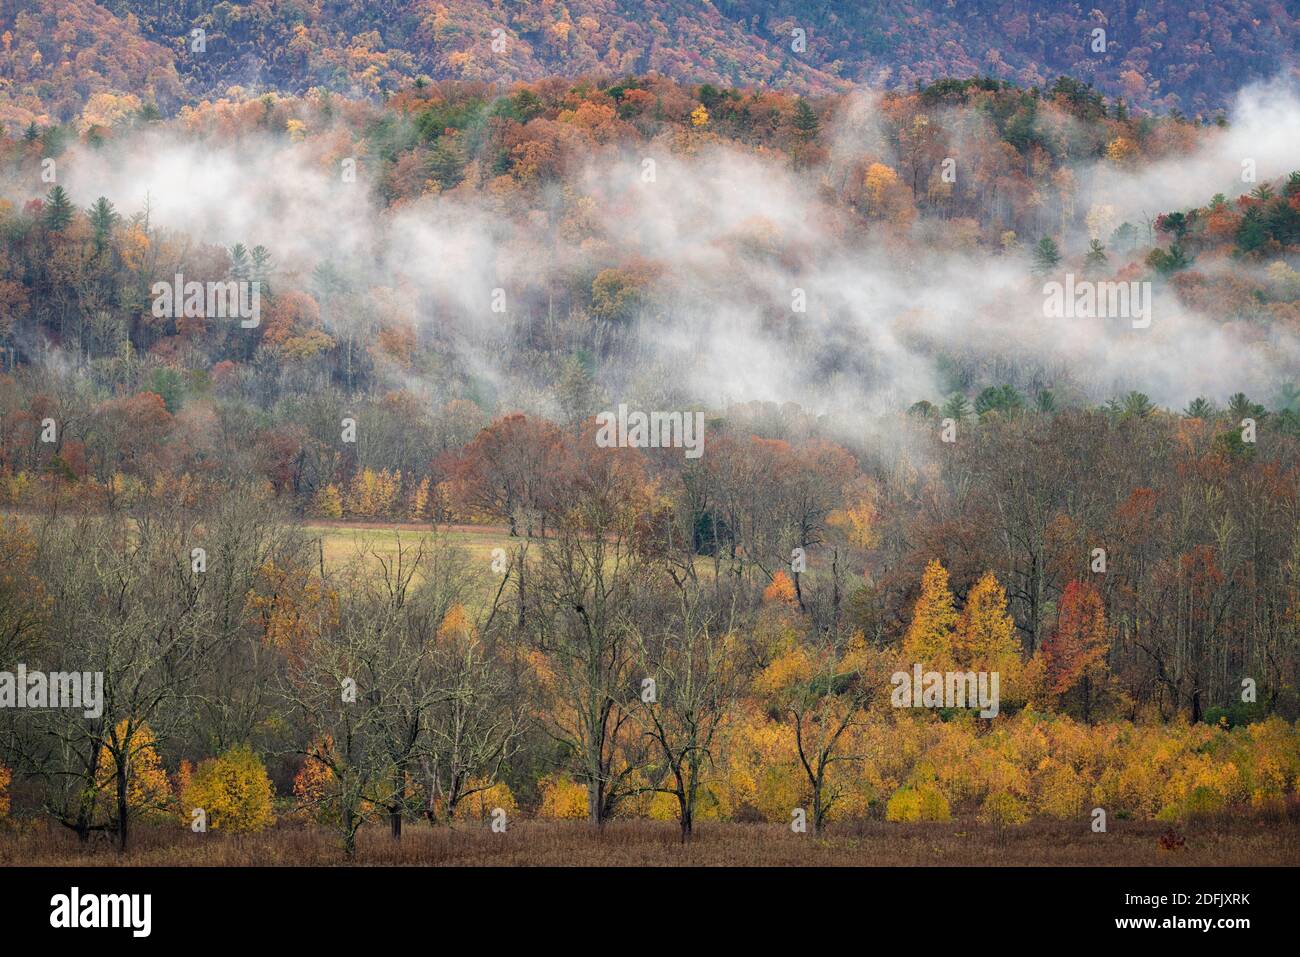 Misty autumn morning in the Cade’s Cove section of Great Smoky Mountains National Park, TN Stock Photo